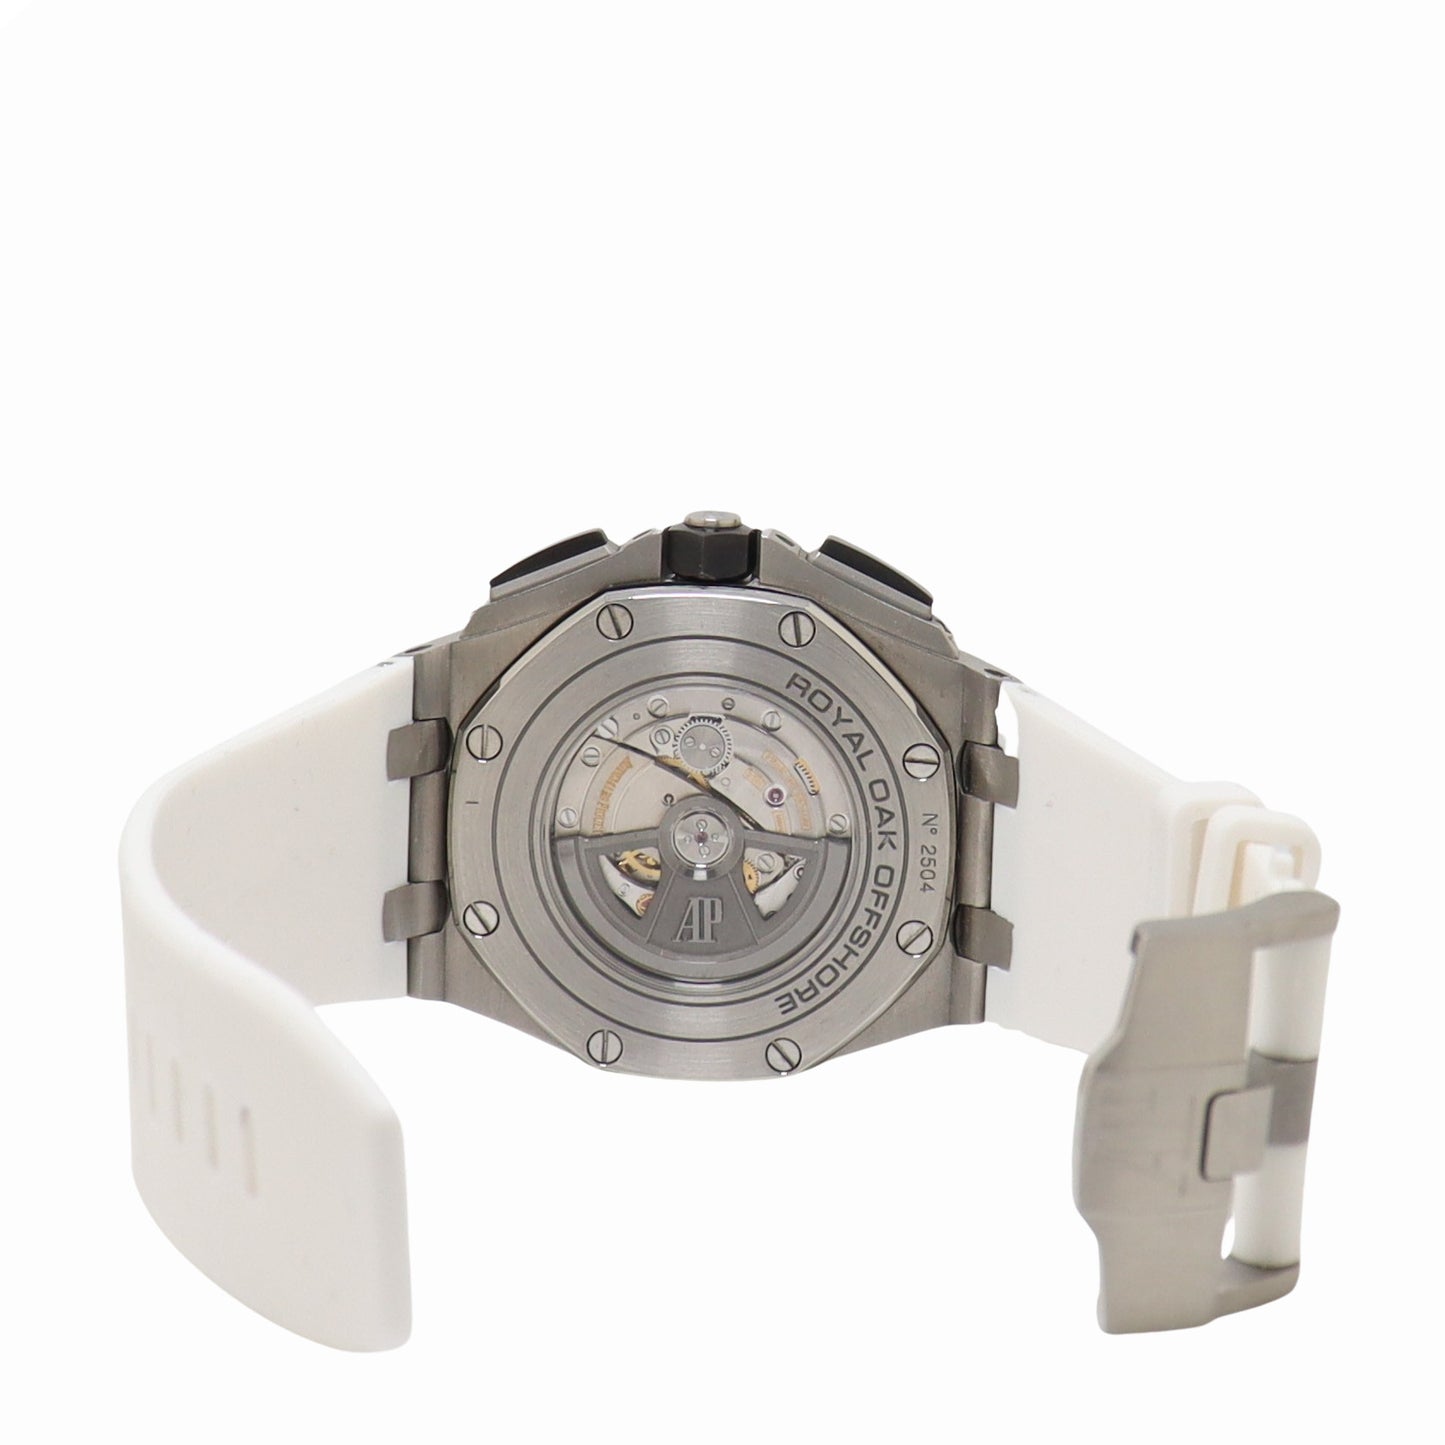 Audemars Piguet Royal Oak Offshore 44mm Stainless Steel Silver Mega Tapisserie Dial Watch Reference# 26400SO.OO.A002CA.01 - Happy Jewelers Fine Jewelry Lifetime Warranty